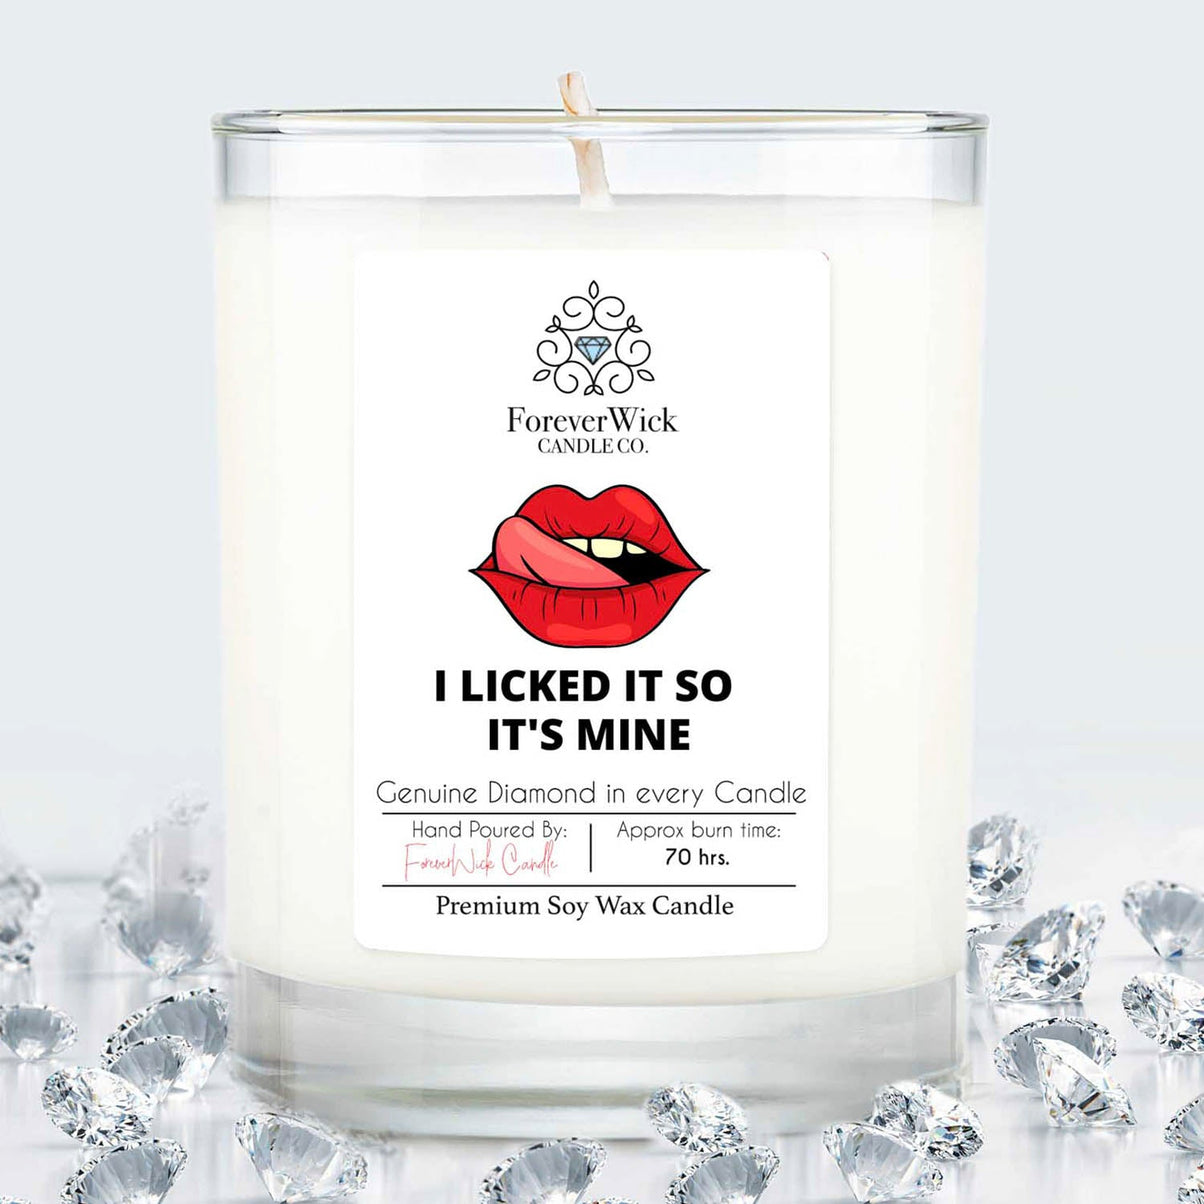 I Licked it so it's Mine Diamond Candle Deal